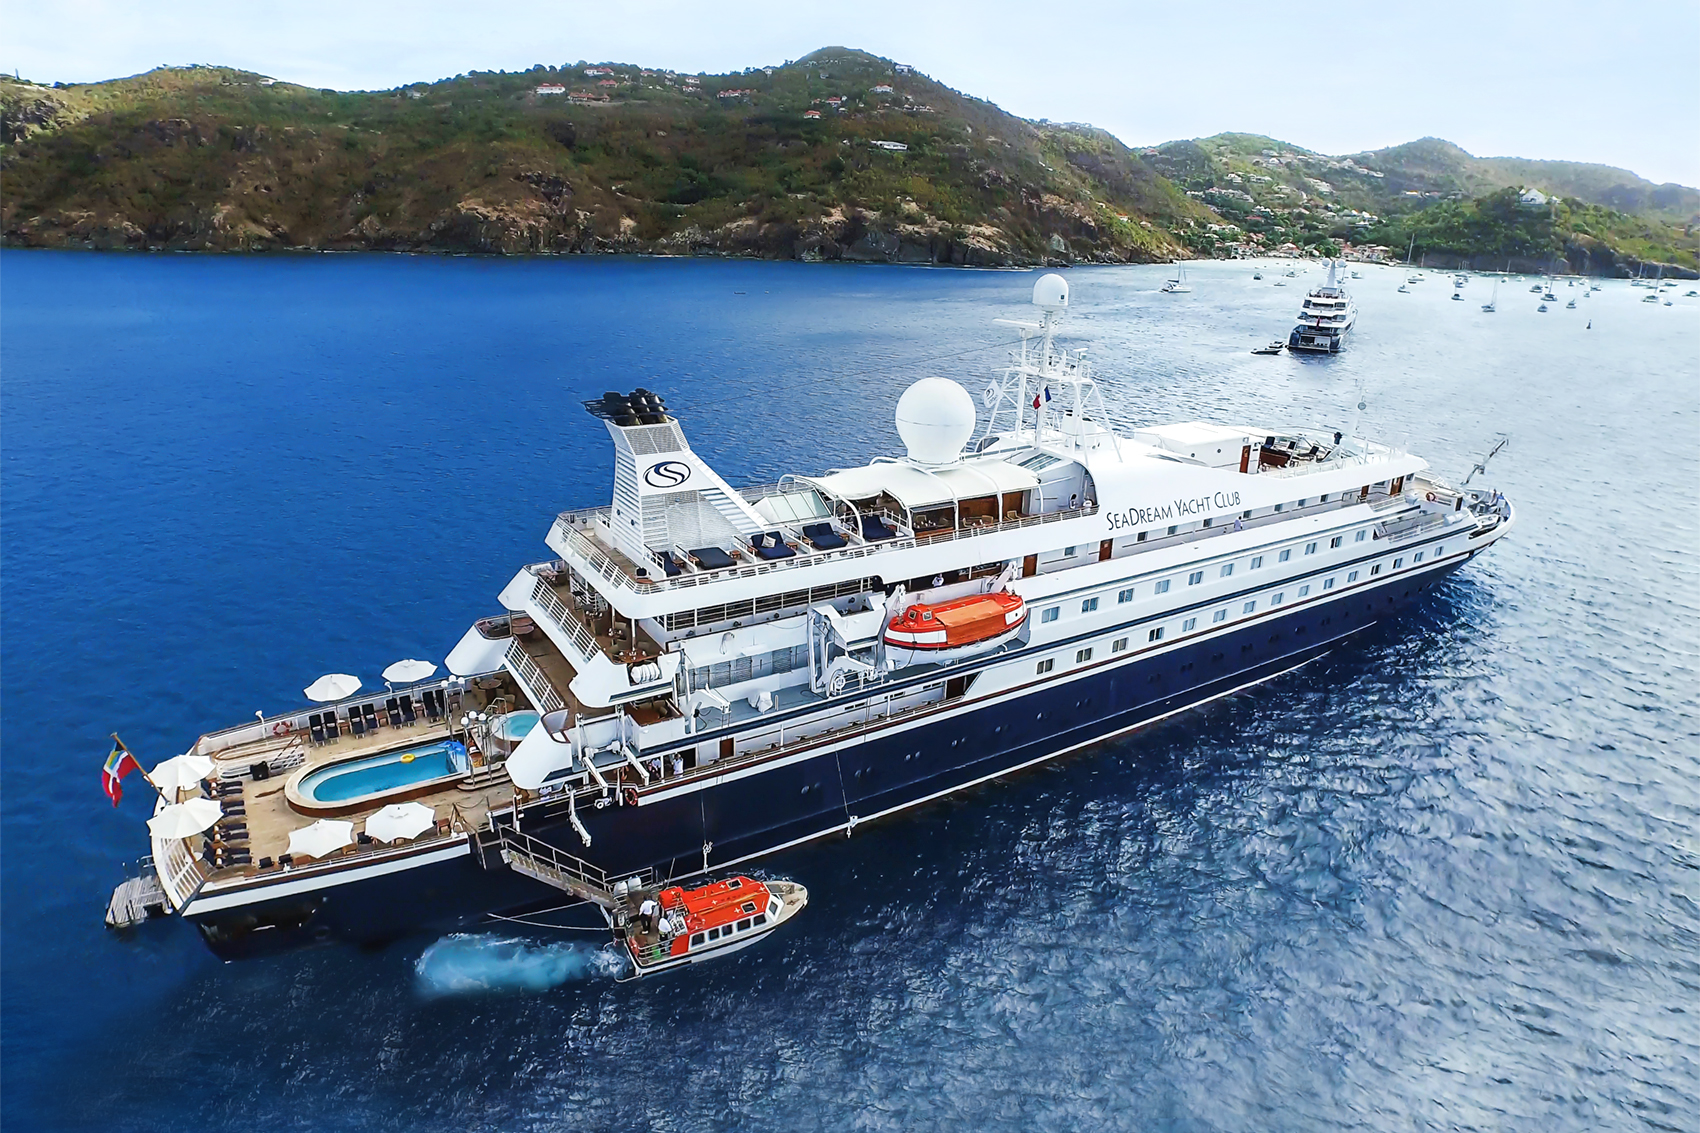 Norwegian-owned cruiseship operator SeaDream Yacht Club has cancelled all sailing for the remainder of 2020 after positive COVID-19 test results onboard one of its cruises, it said on Tuesday, dealing a fresh blow to the cruise industry.